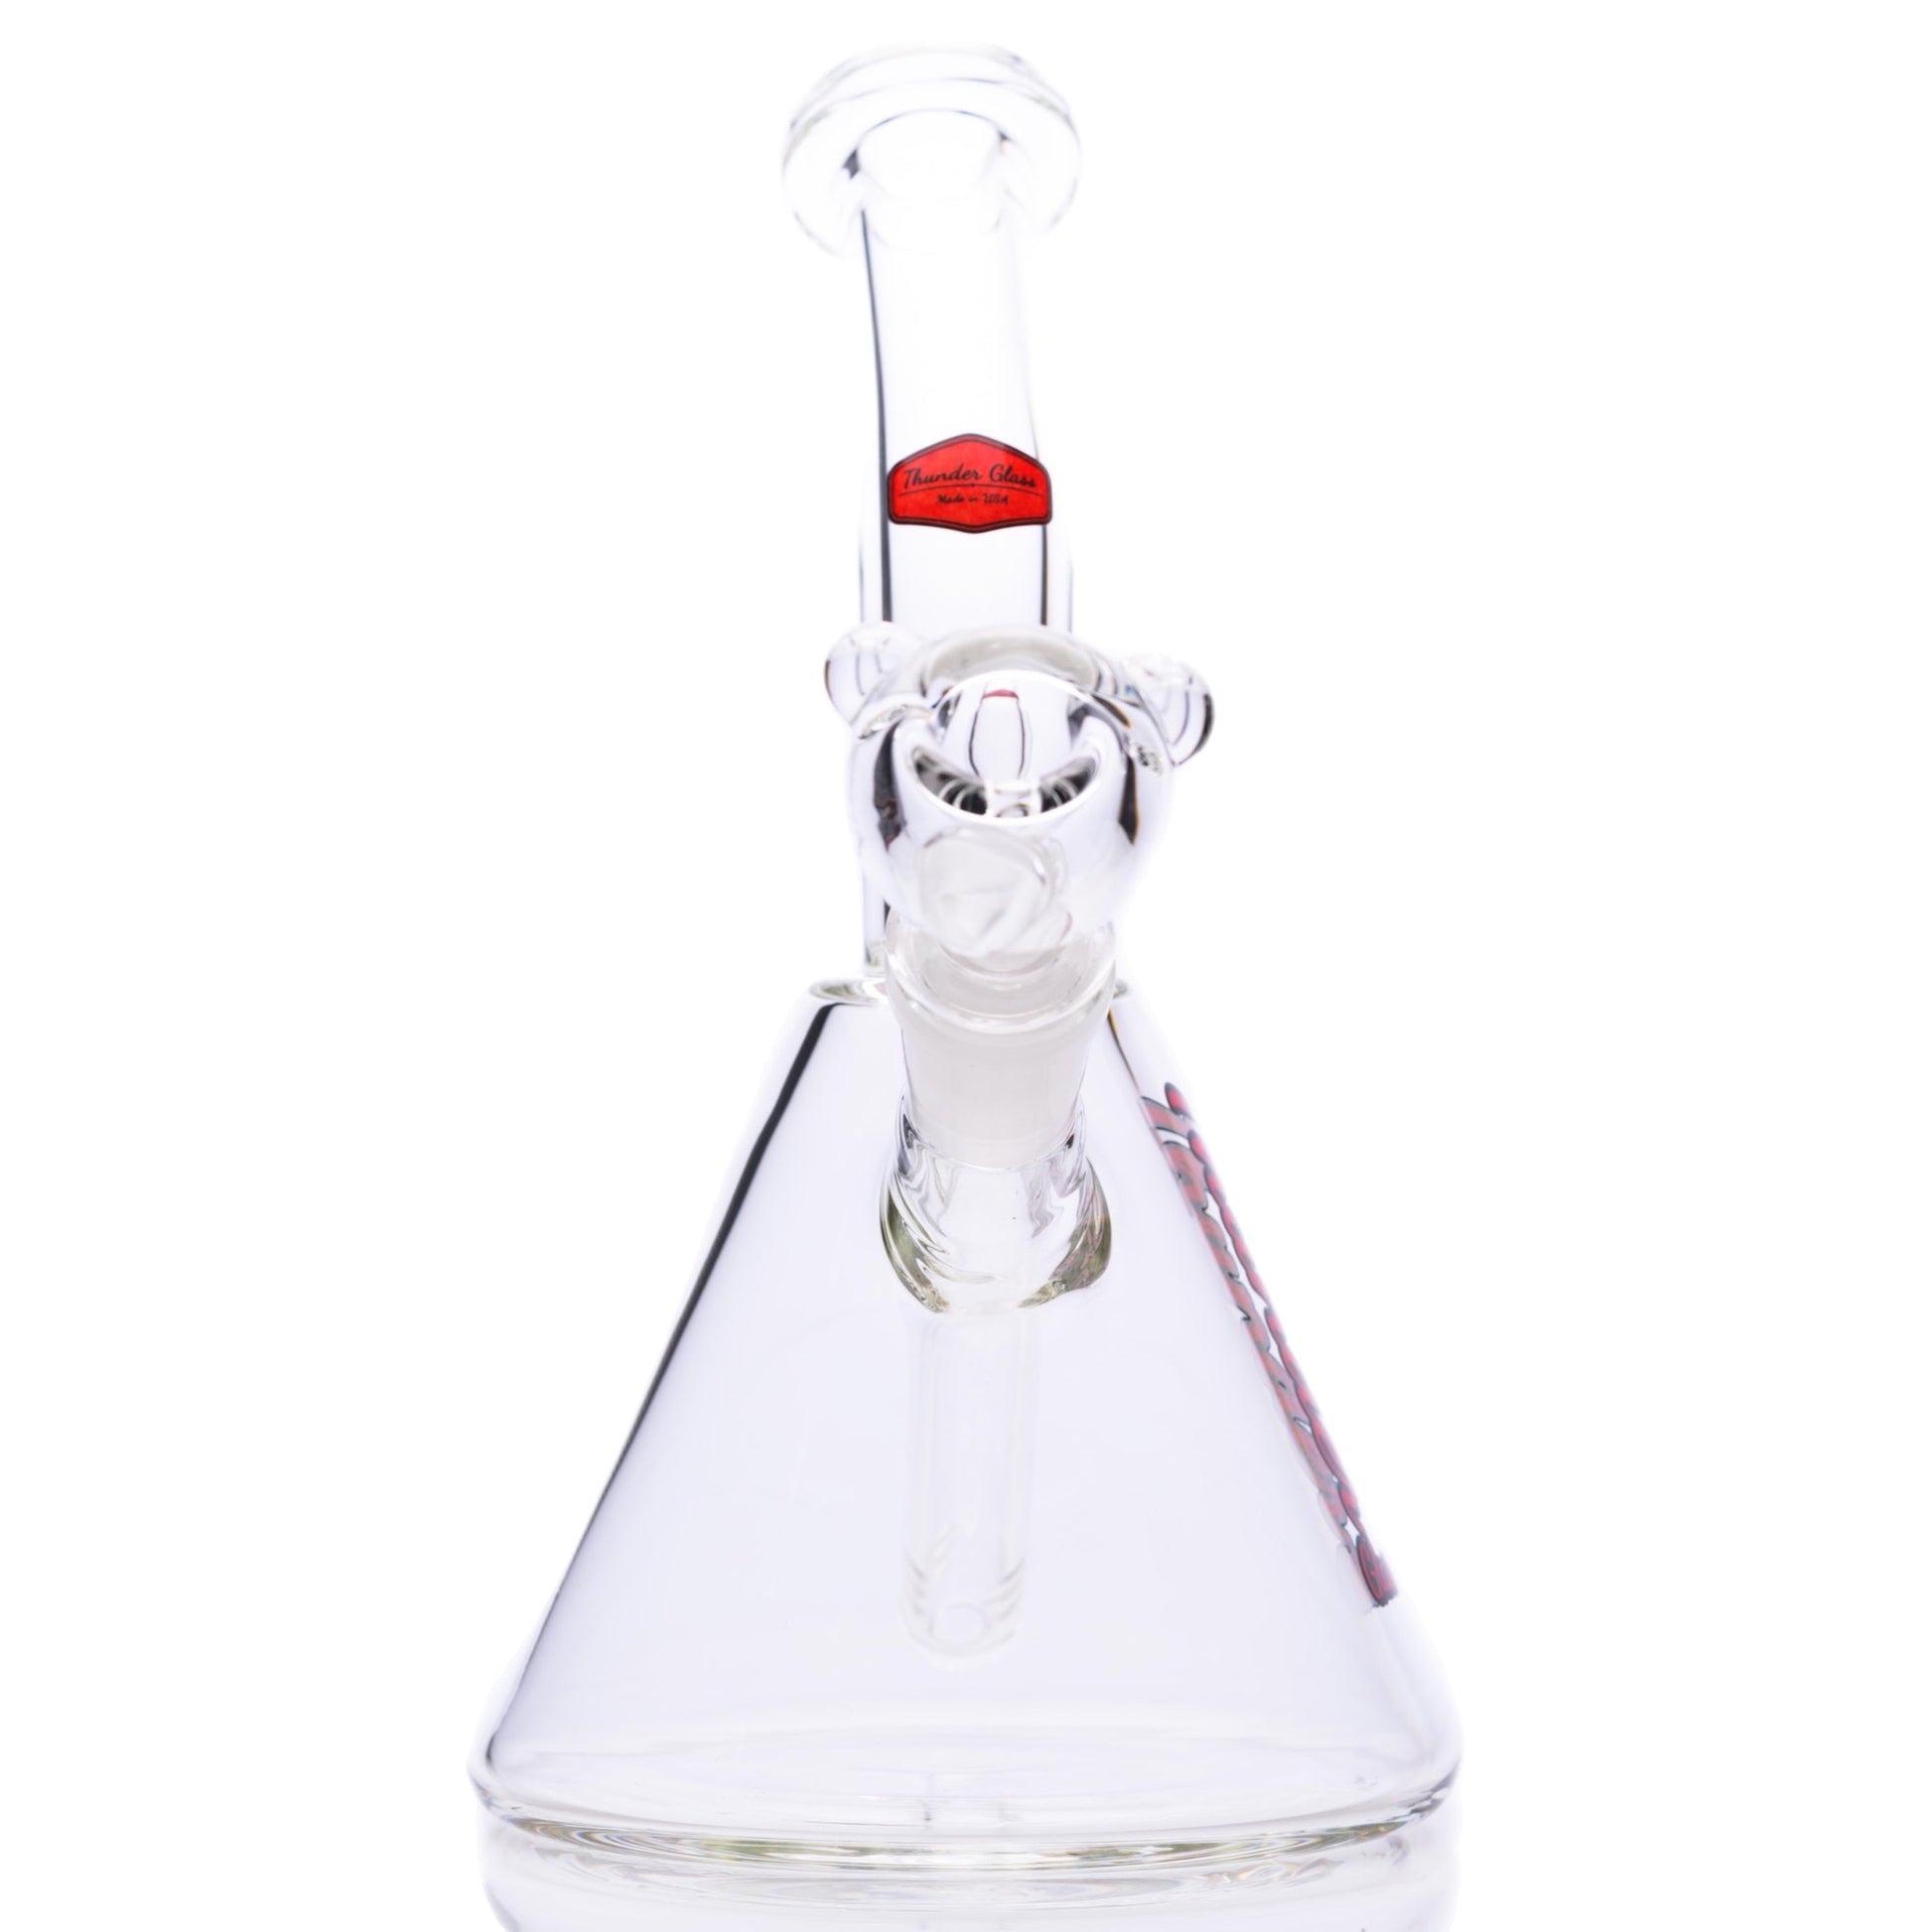 Thunder Glass 9” Pyramid Bubbler by Thunder Glass | Mission Dispensary